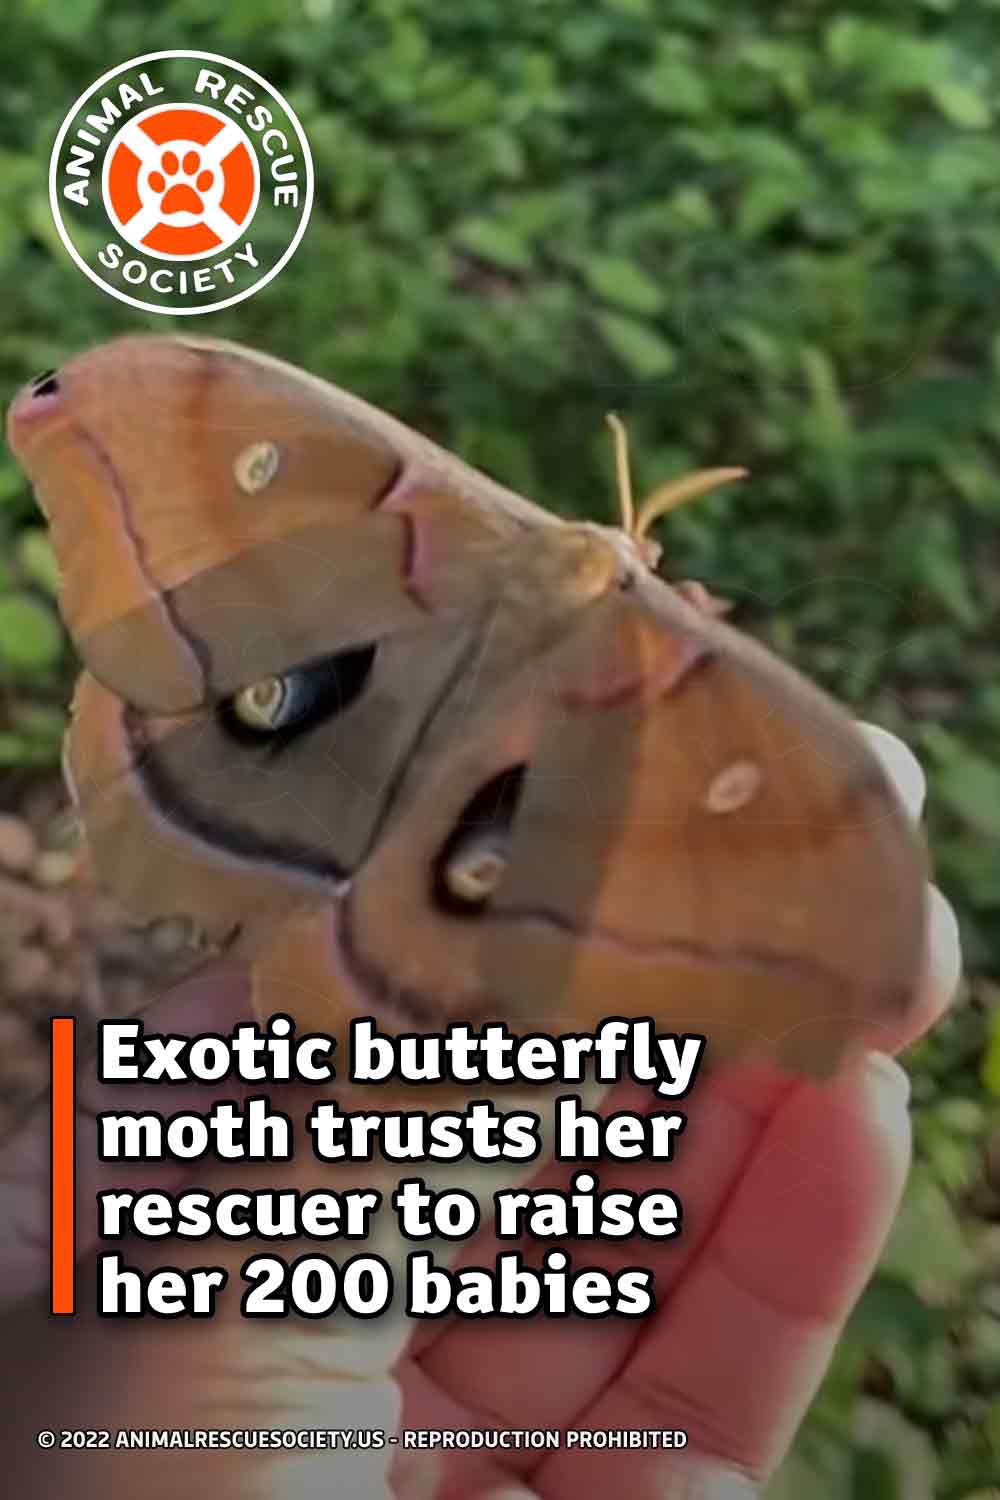 Exotic butterfly moth trusts her rescuer to raise her 200 babies